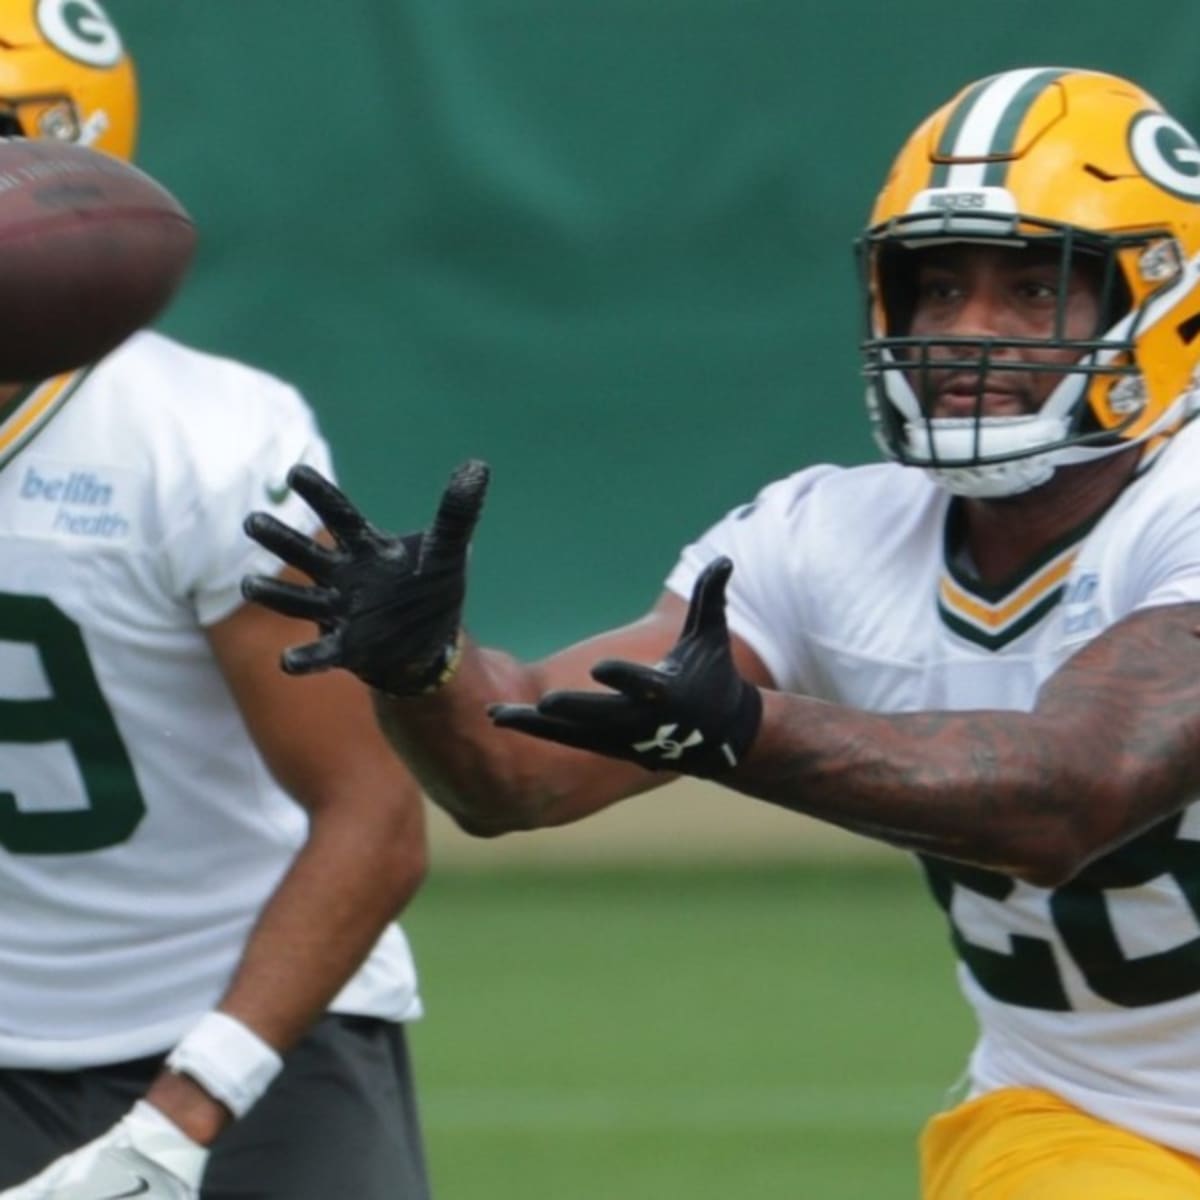 New London's AJ Dillon eager to rebound with Packers after busy